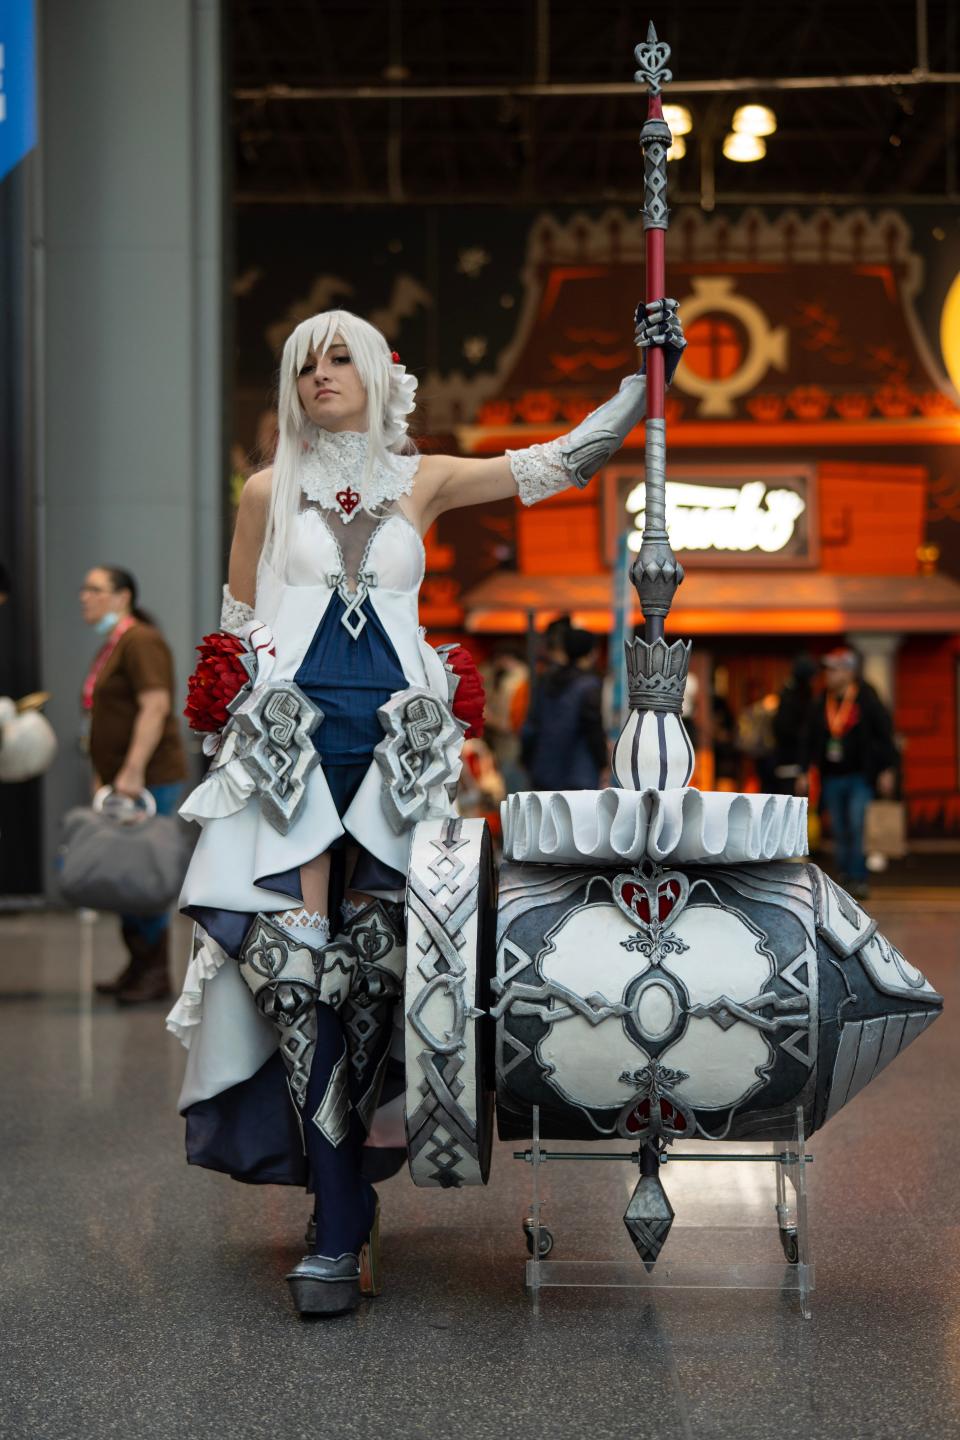 A cosplayer dressed as Snow White from "SINoALICE" at New York Comic Con 2022.